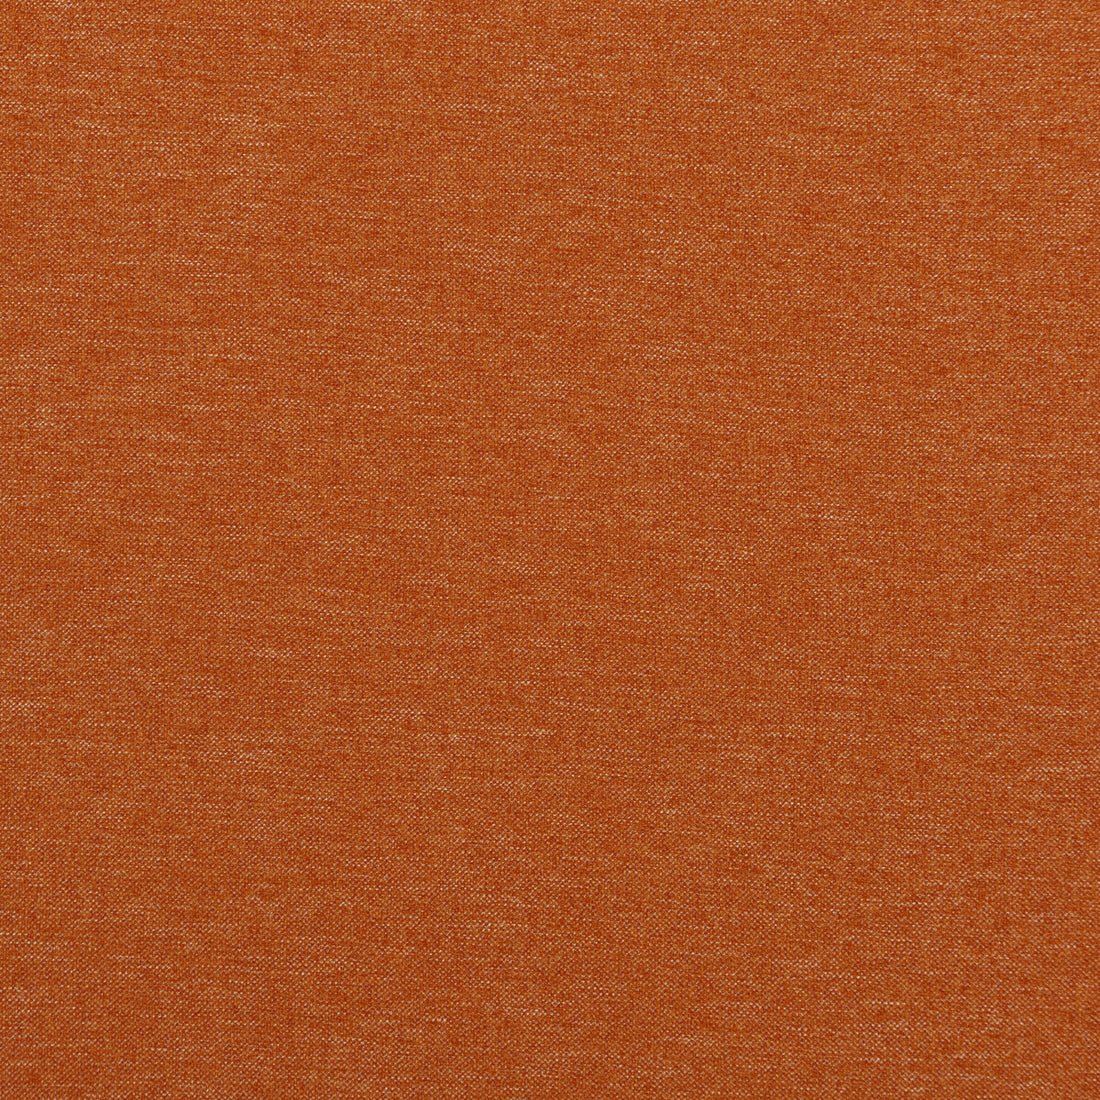 Melbury fabric in spice color - pattern PF50440.330.0 - by Baker Lifestyle in the Carnival collection